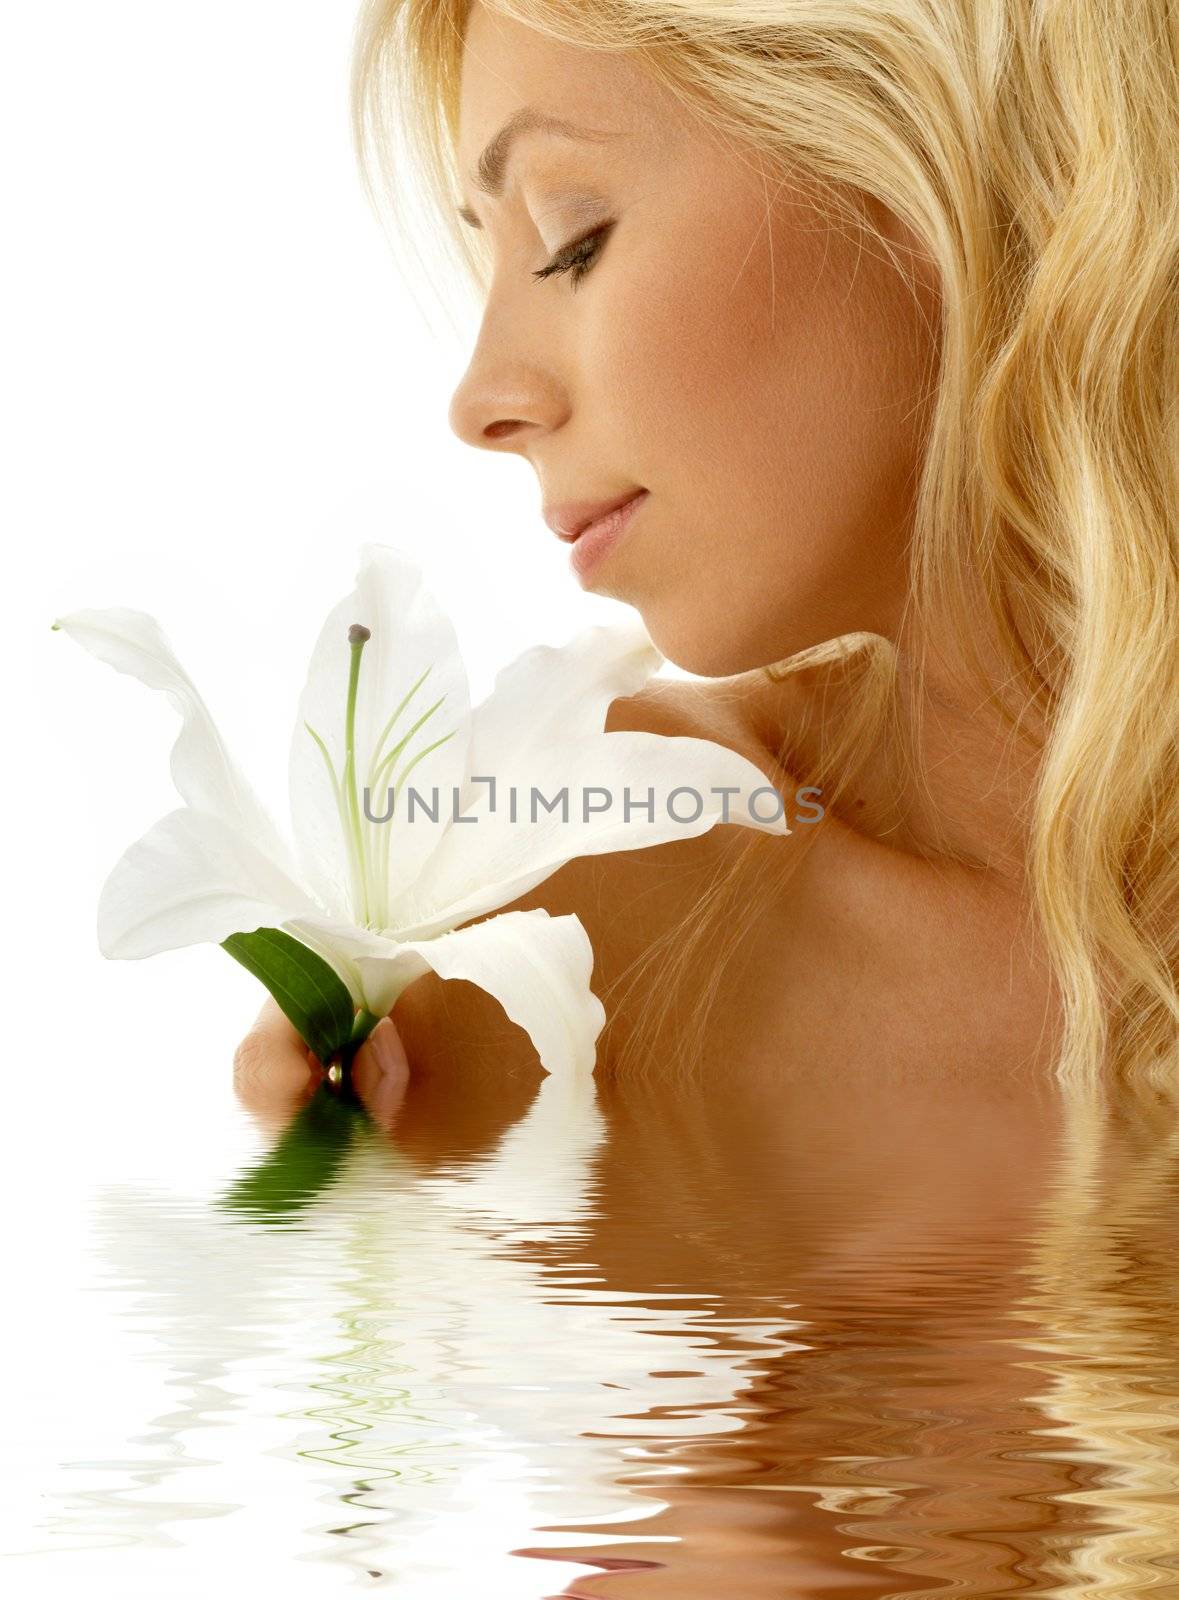 pretty lady with madonna lily in water